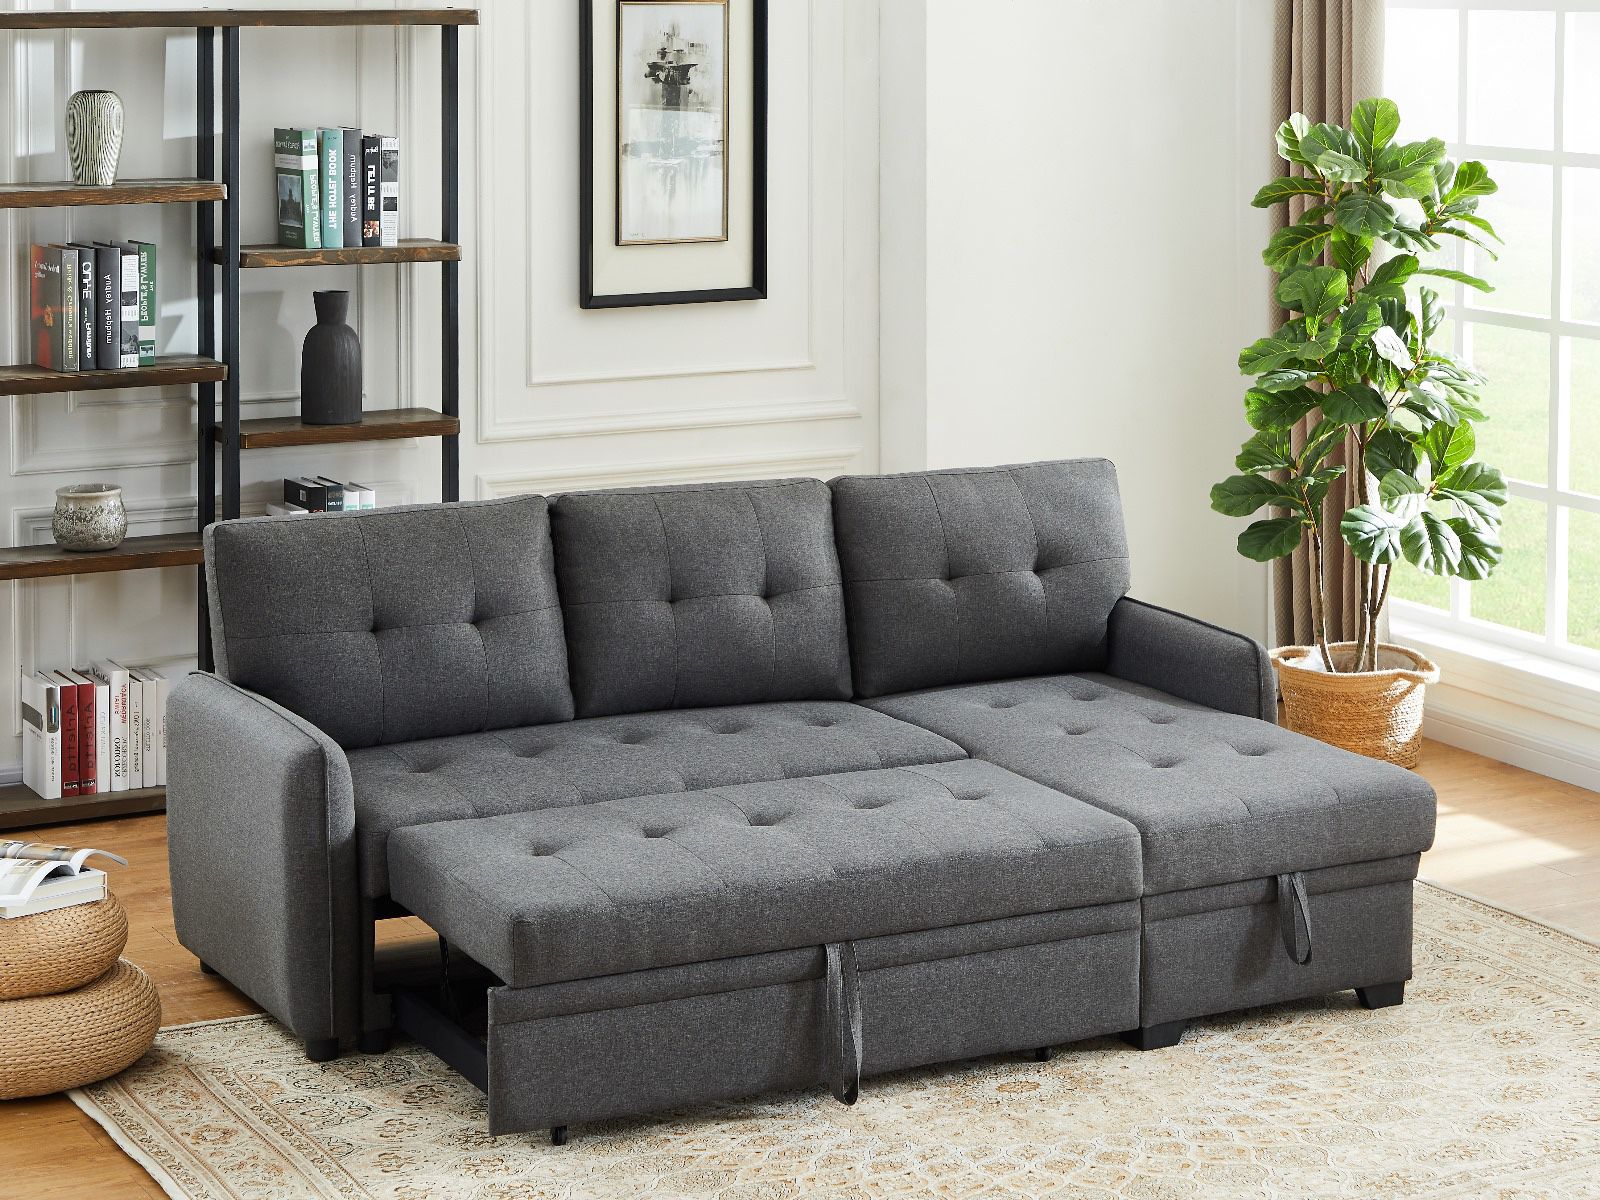 New! Grey Sectional, Grey Couch, Grey Sofa, Grey Sofa Bed, Sofabed, Reversible Sectional Sofa With Pull Out Bed, Sleeper Sofa, Sectional 